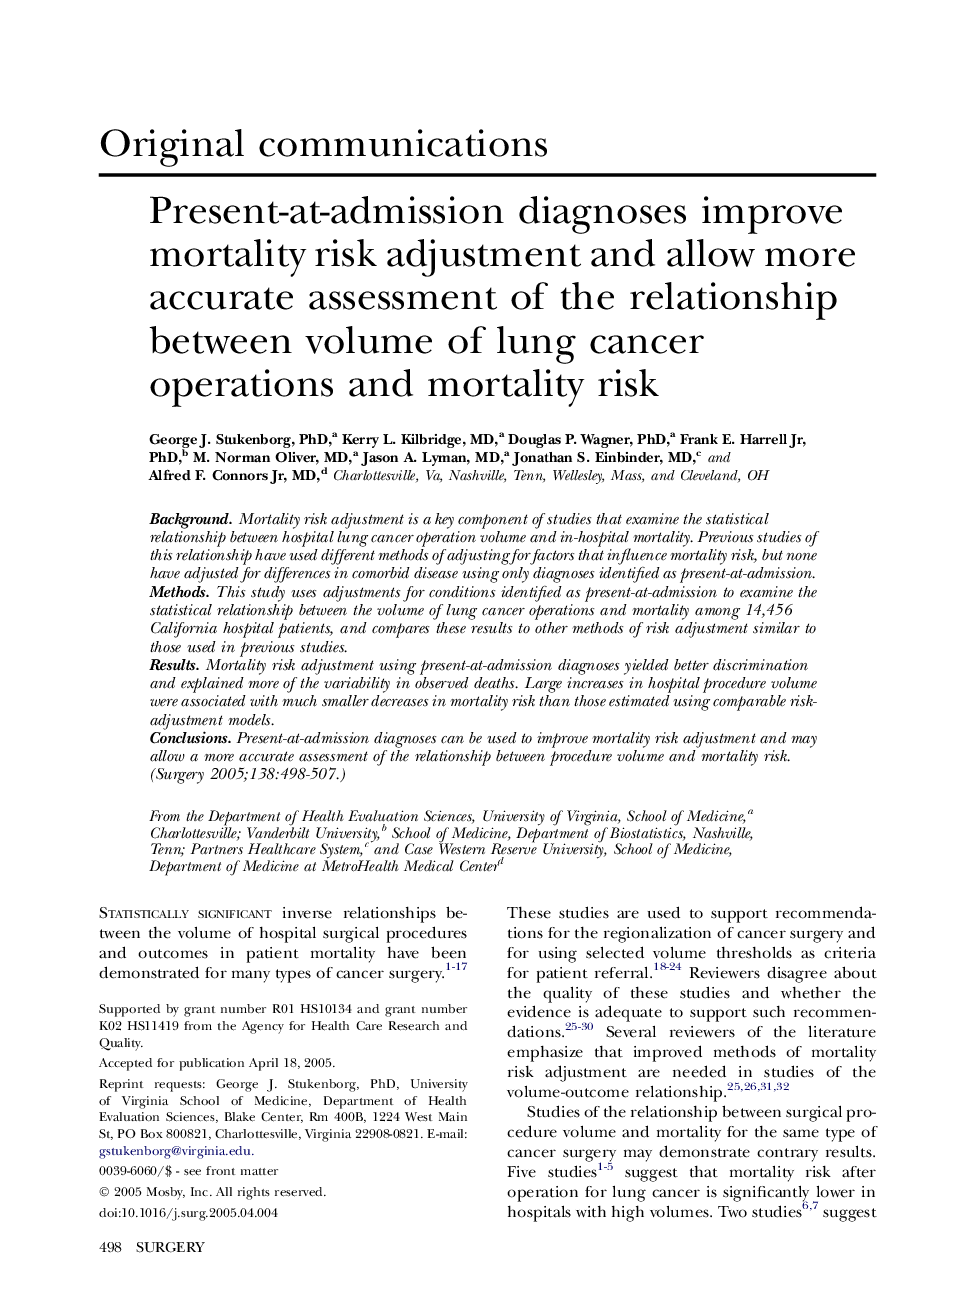 Present-at-admission diagnoses improve mortality risk adjustment and allow more accurate assessment of the relationship between volume of lung cancer operations and mortality risk